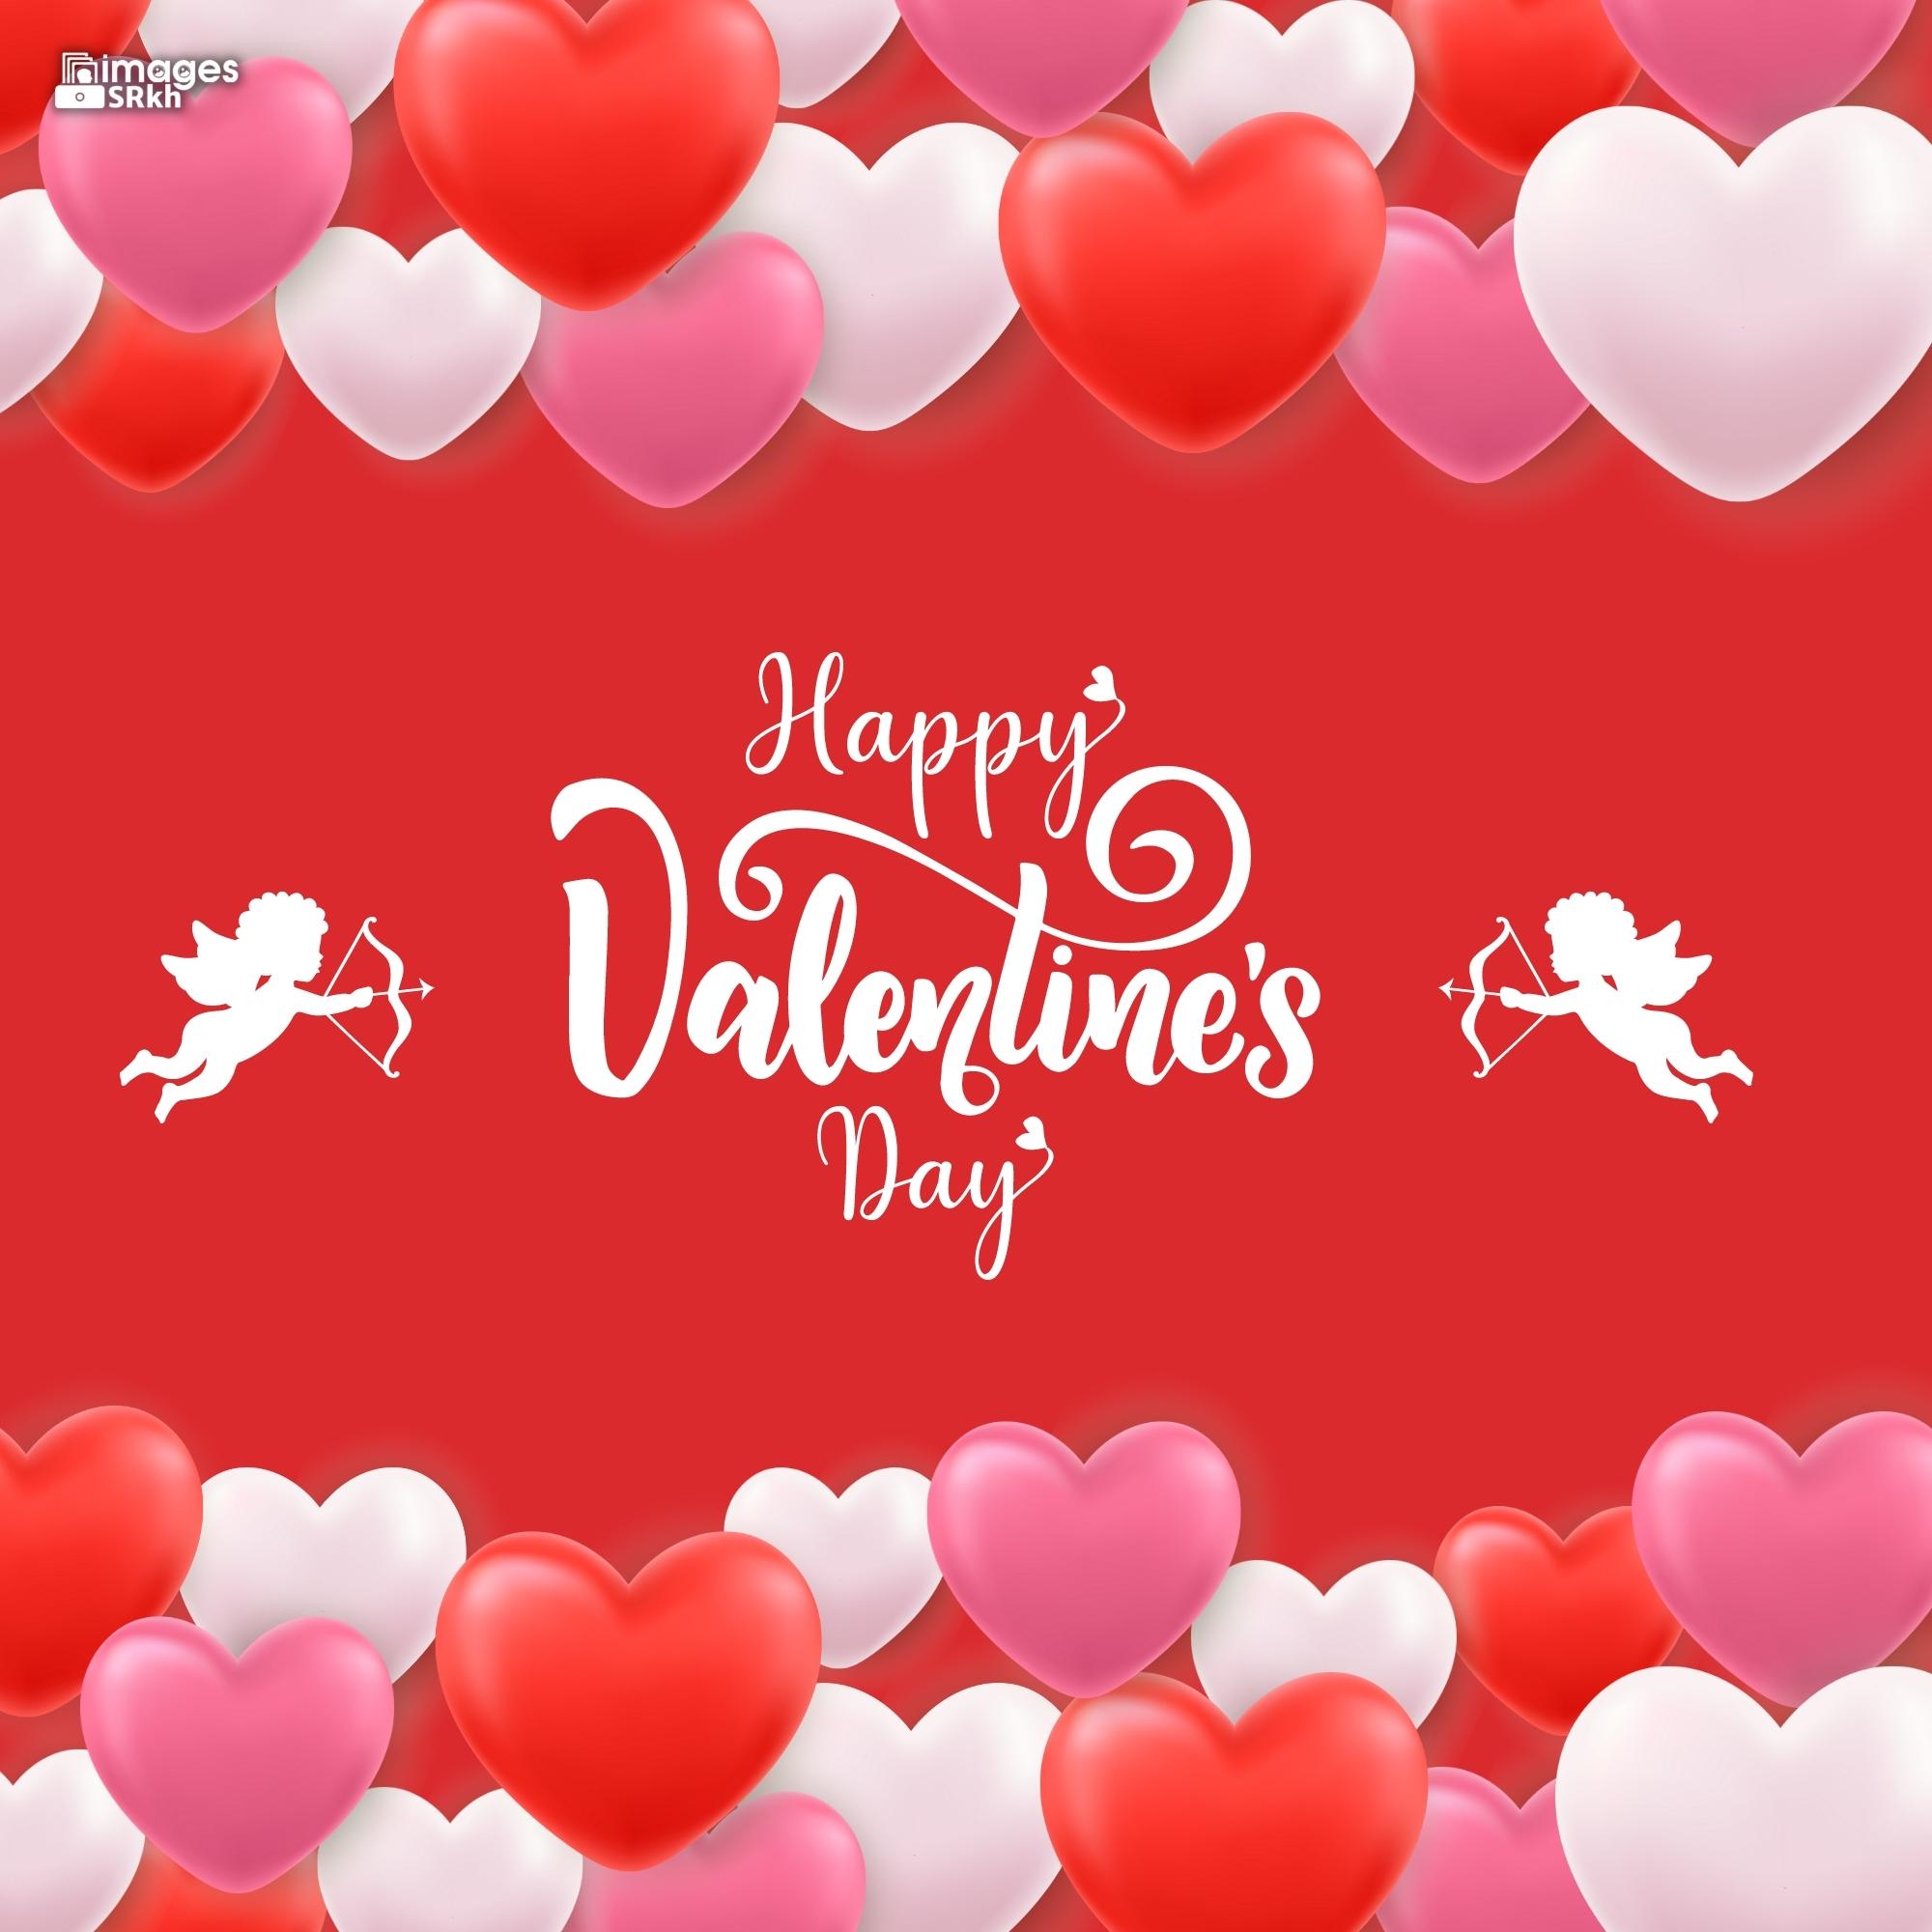 Happy Valentines Day | 422 | PREMIUM IMAGES | Wishes for Love